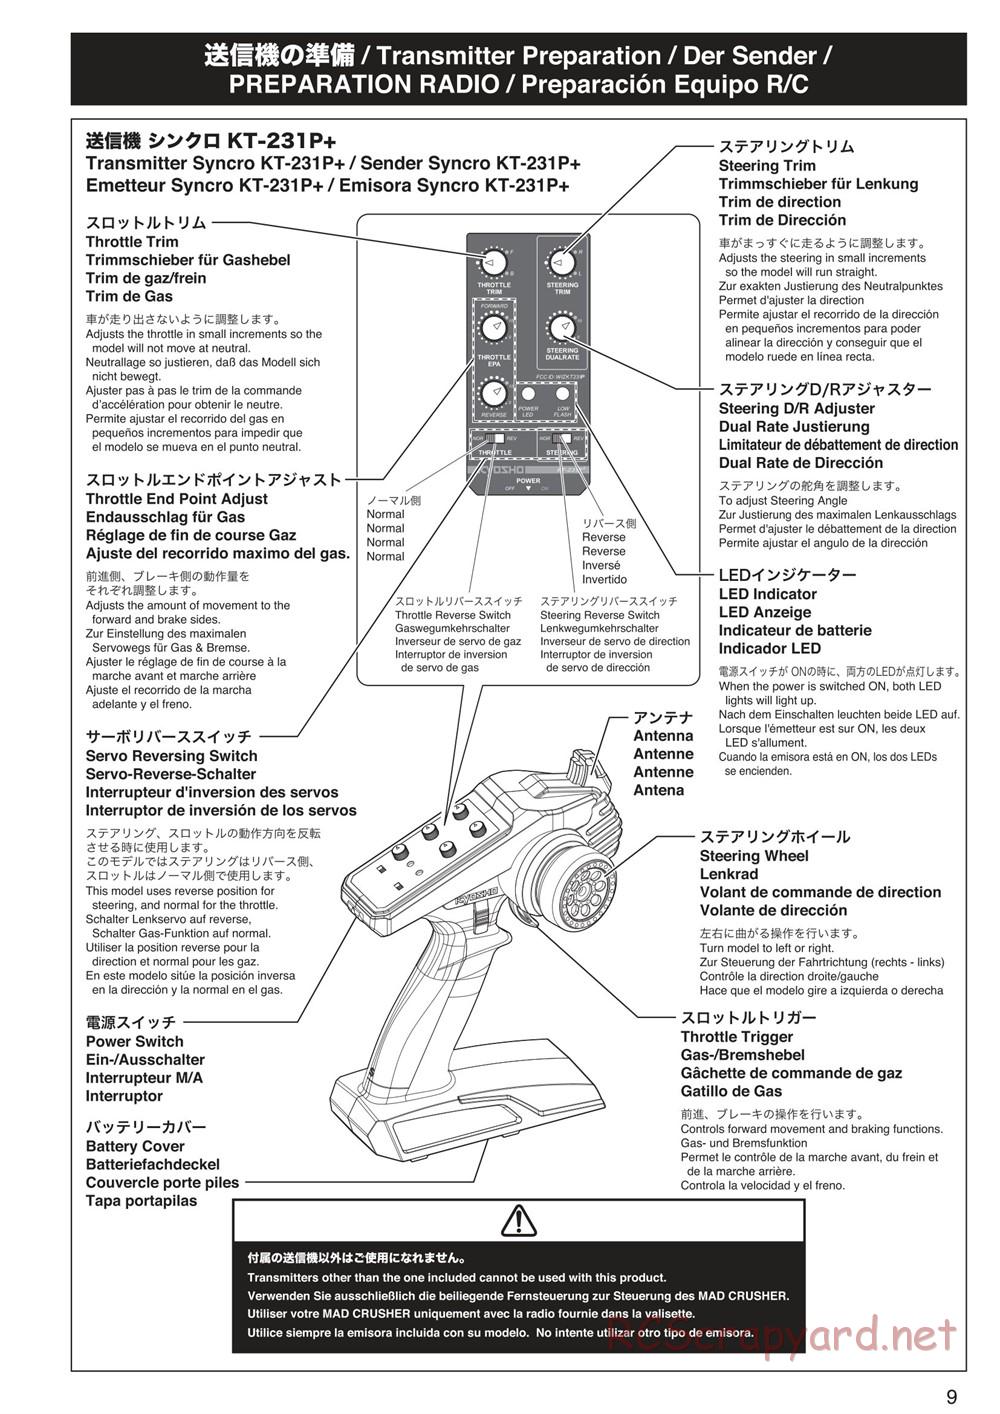 Kyosho - Mad Crusher - Manual - Page 9